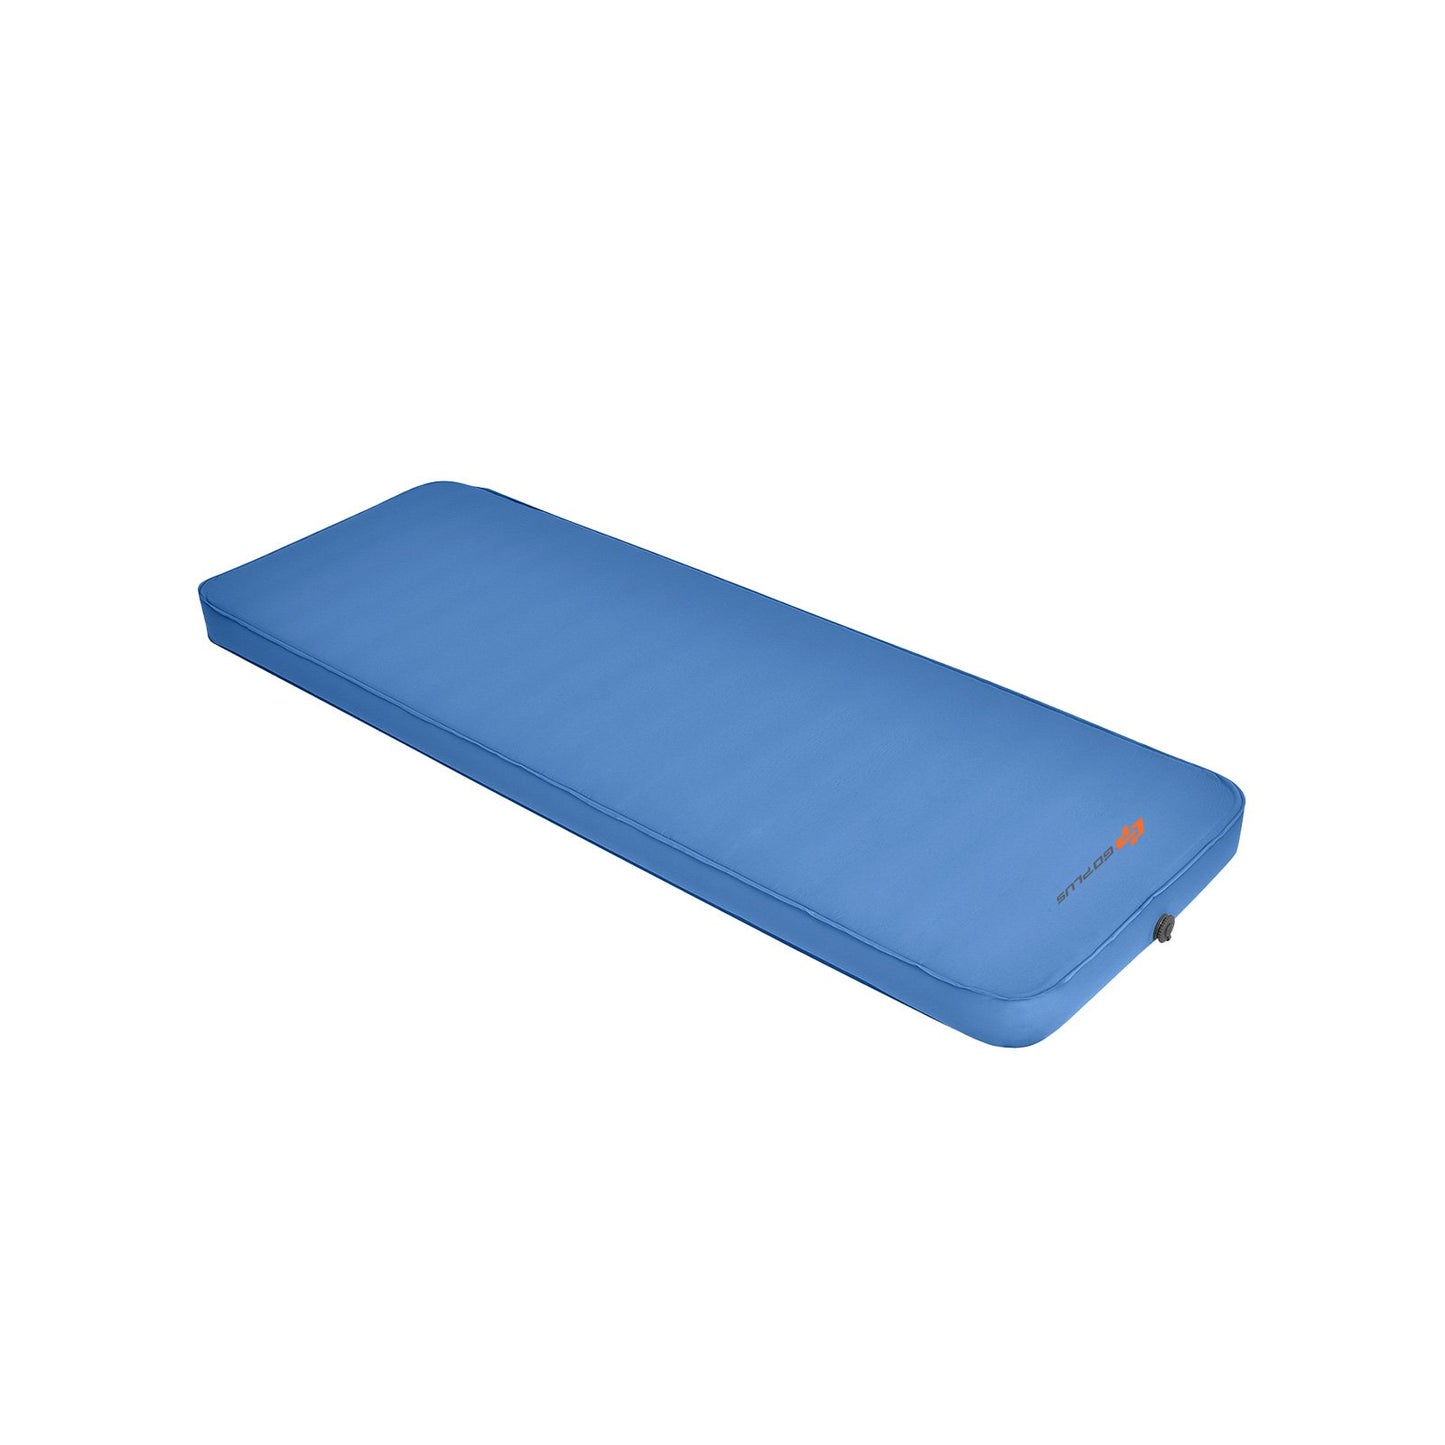 Self Inflating Folding Camping Sleeping Mattress with Carrying Bag, Blue